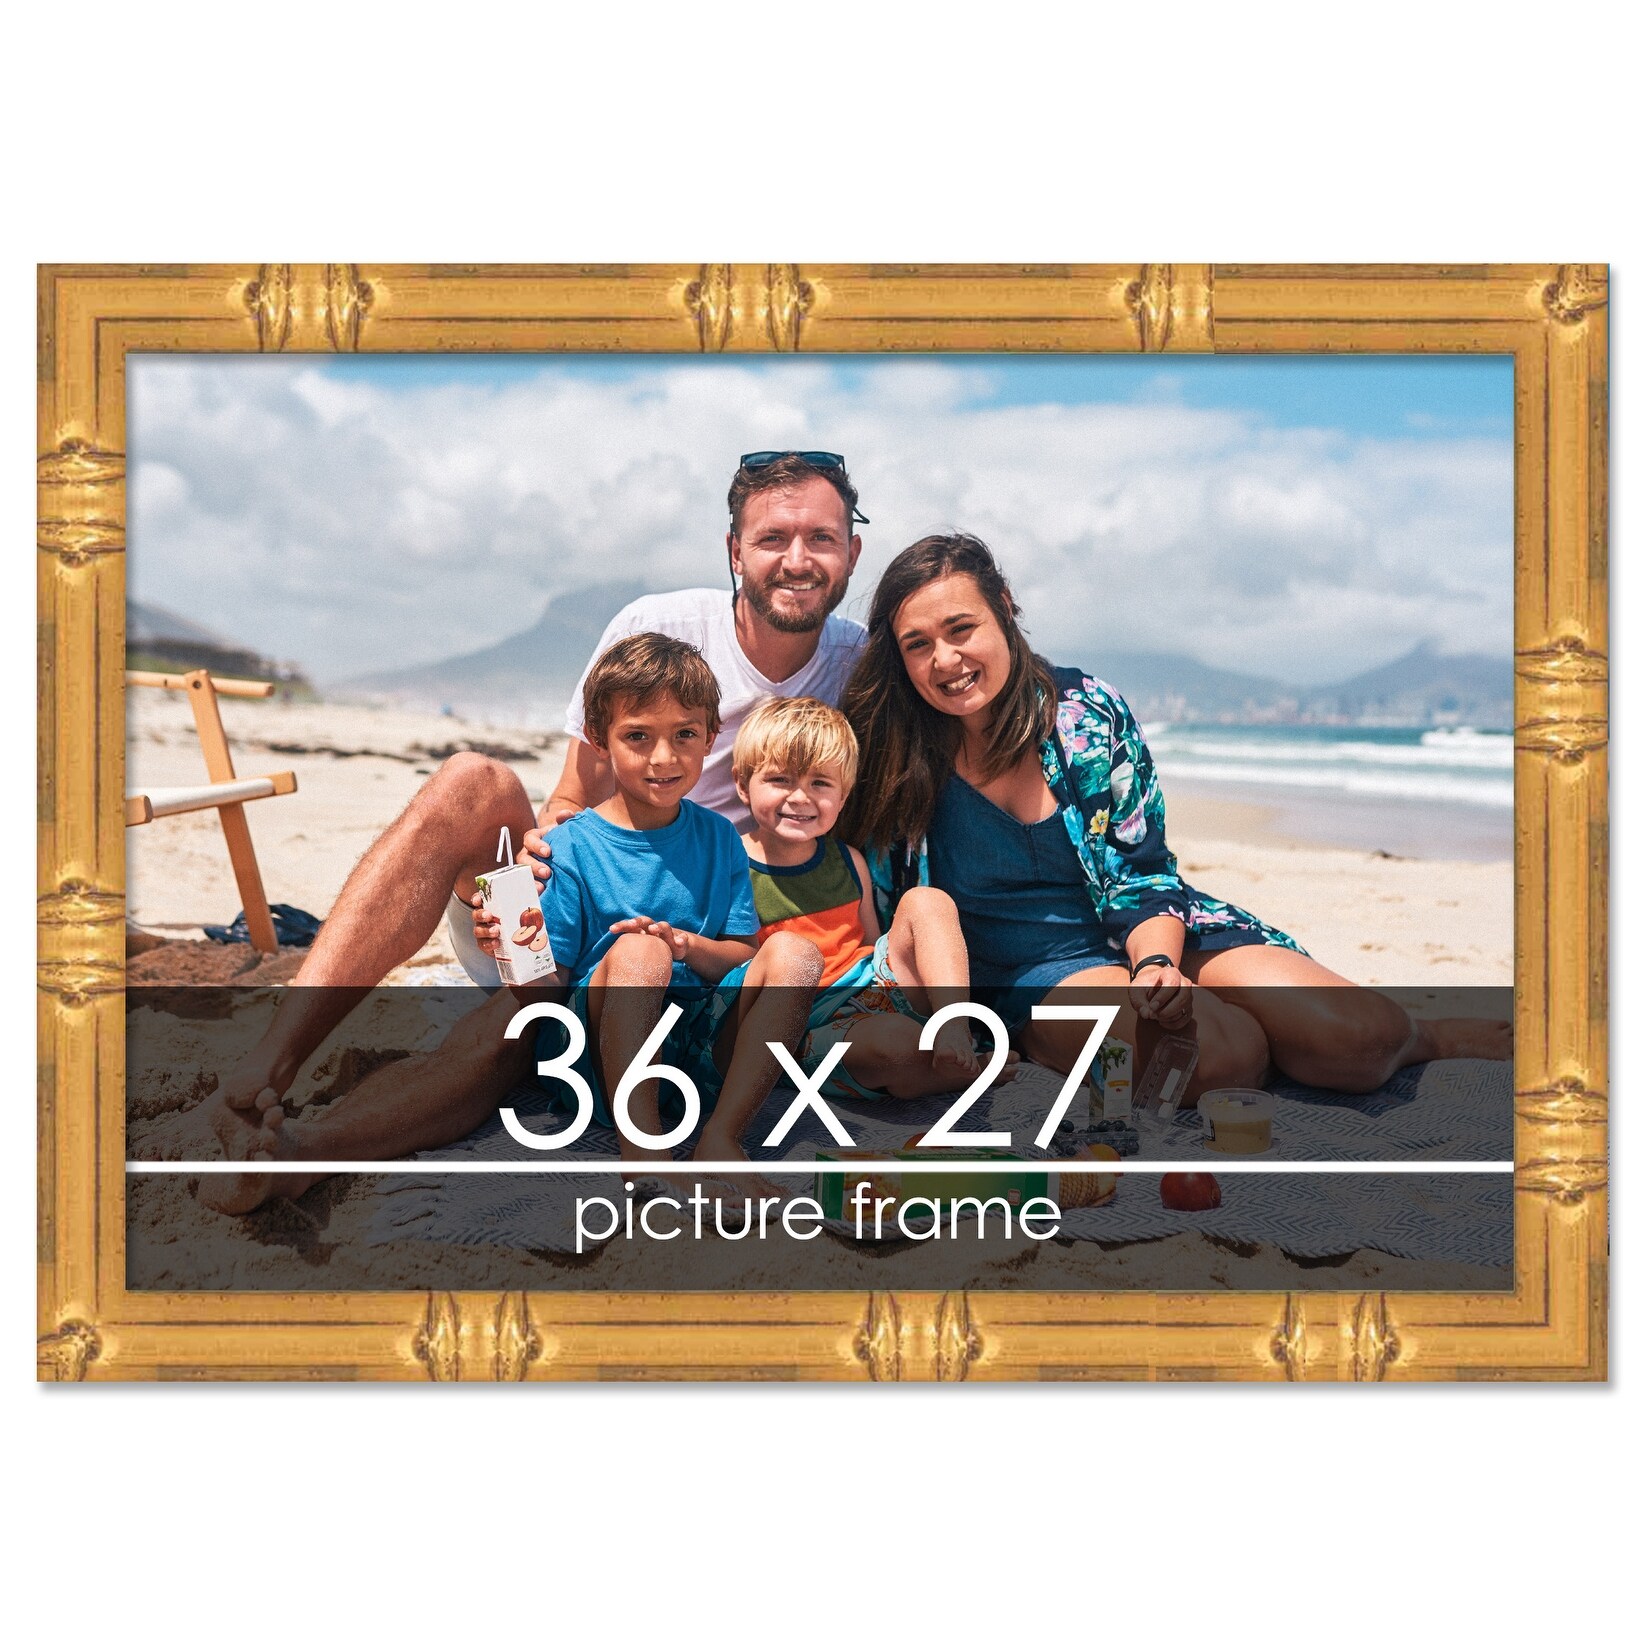 CustomPictureFrames.com 25x26 Gold Bamboo Wood Picture Frame - with Acrylic Front and Foam Board Backing